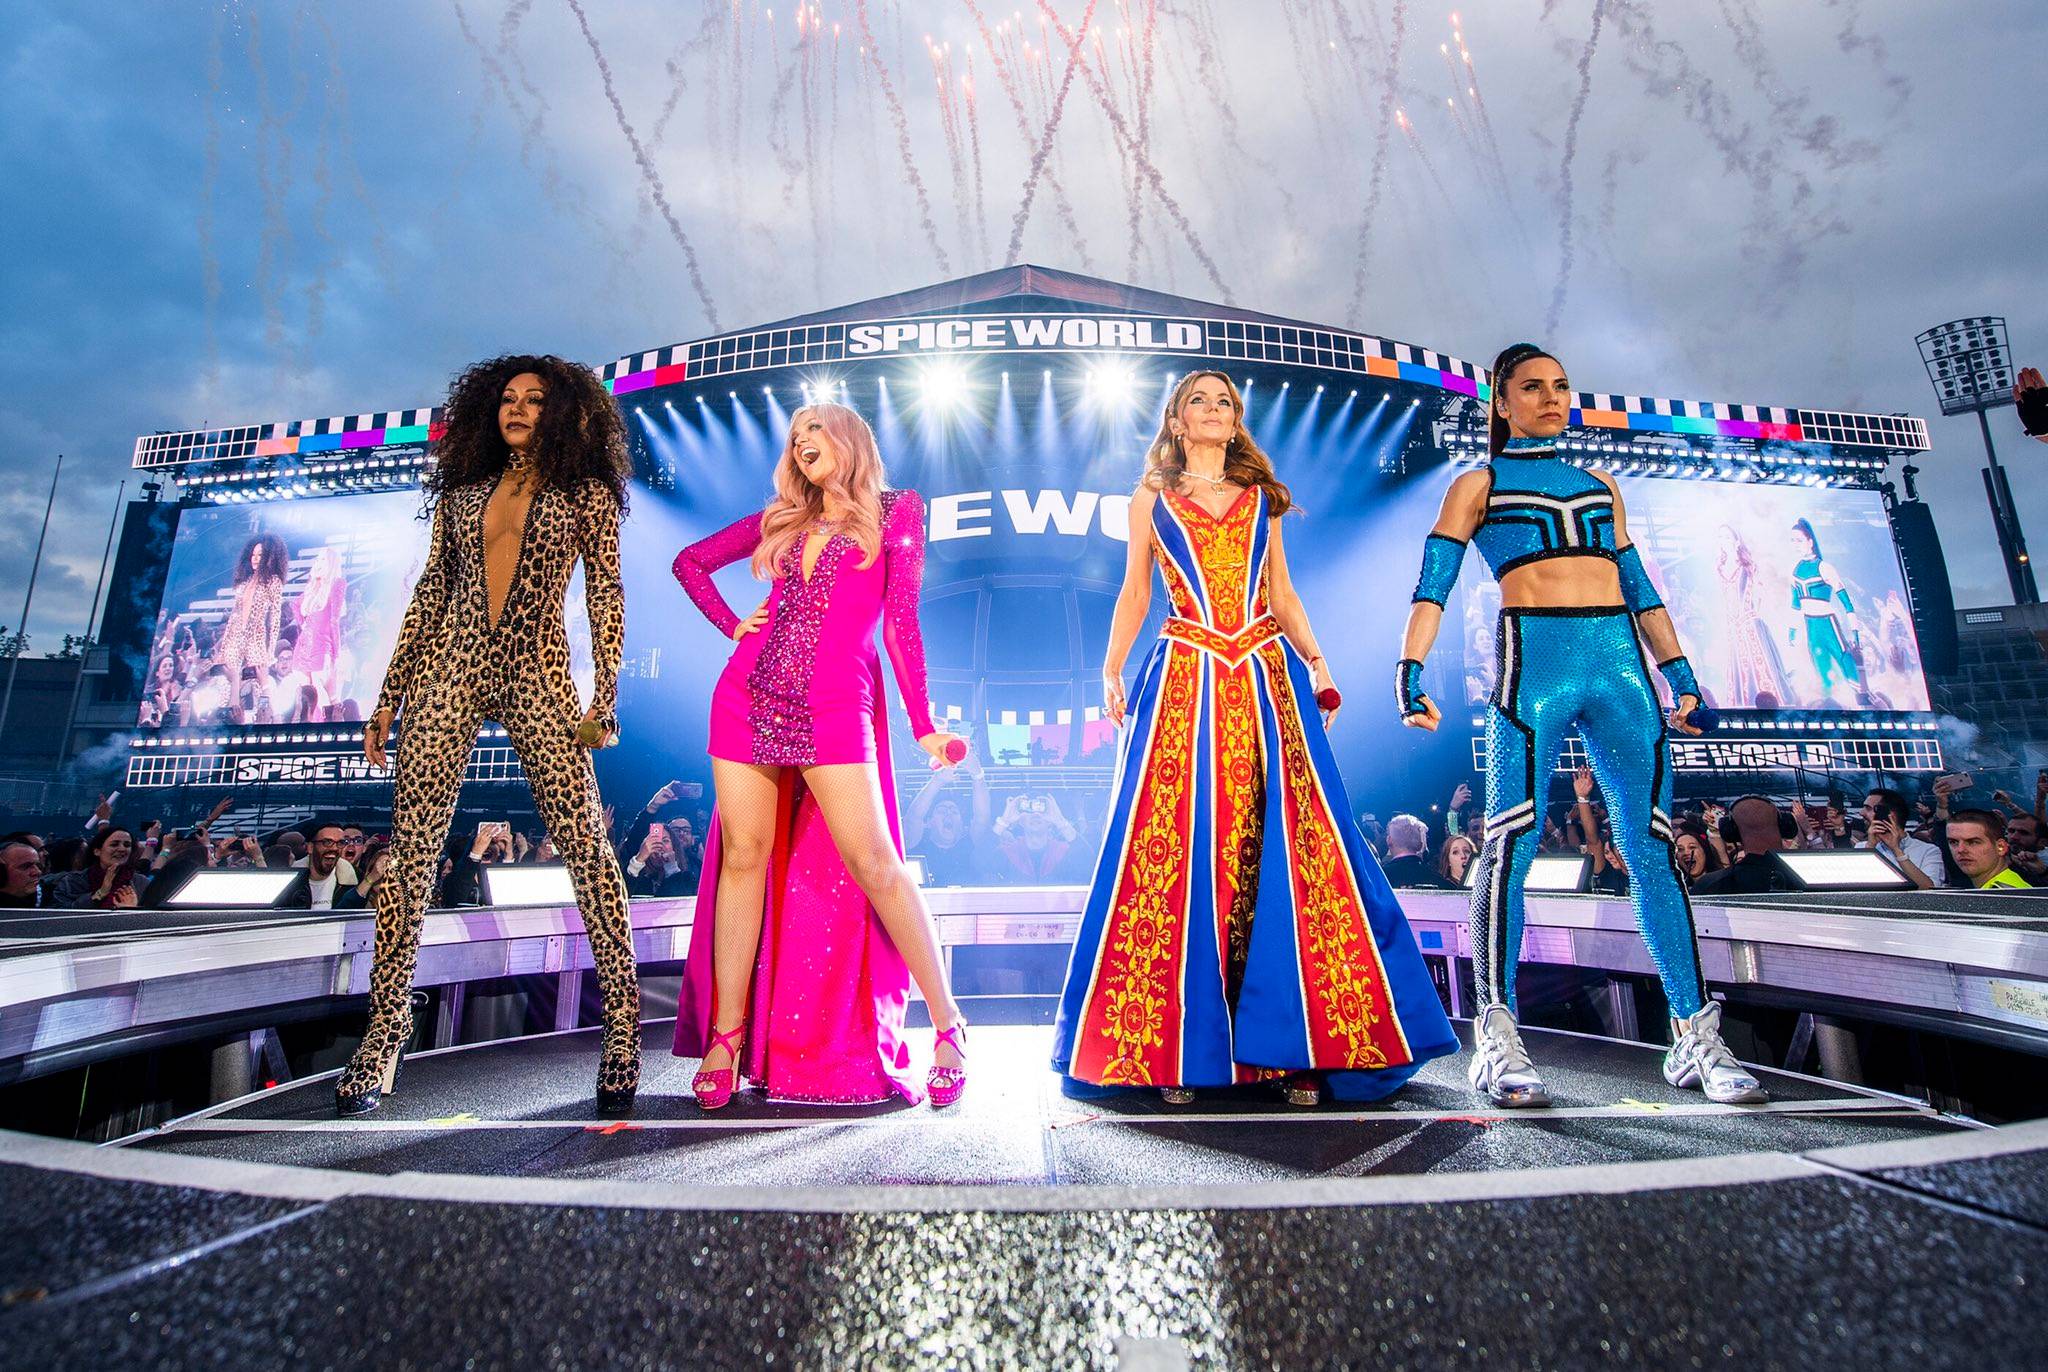 The Spice Girls on May 24, 2019 in Dublin, photo by Andrew Timms